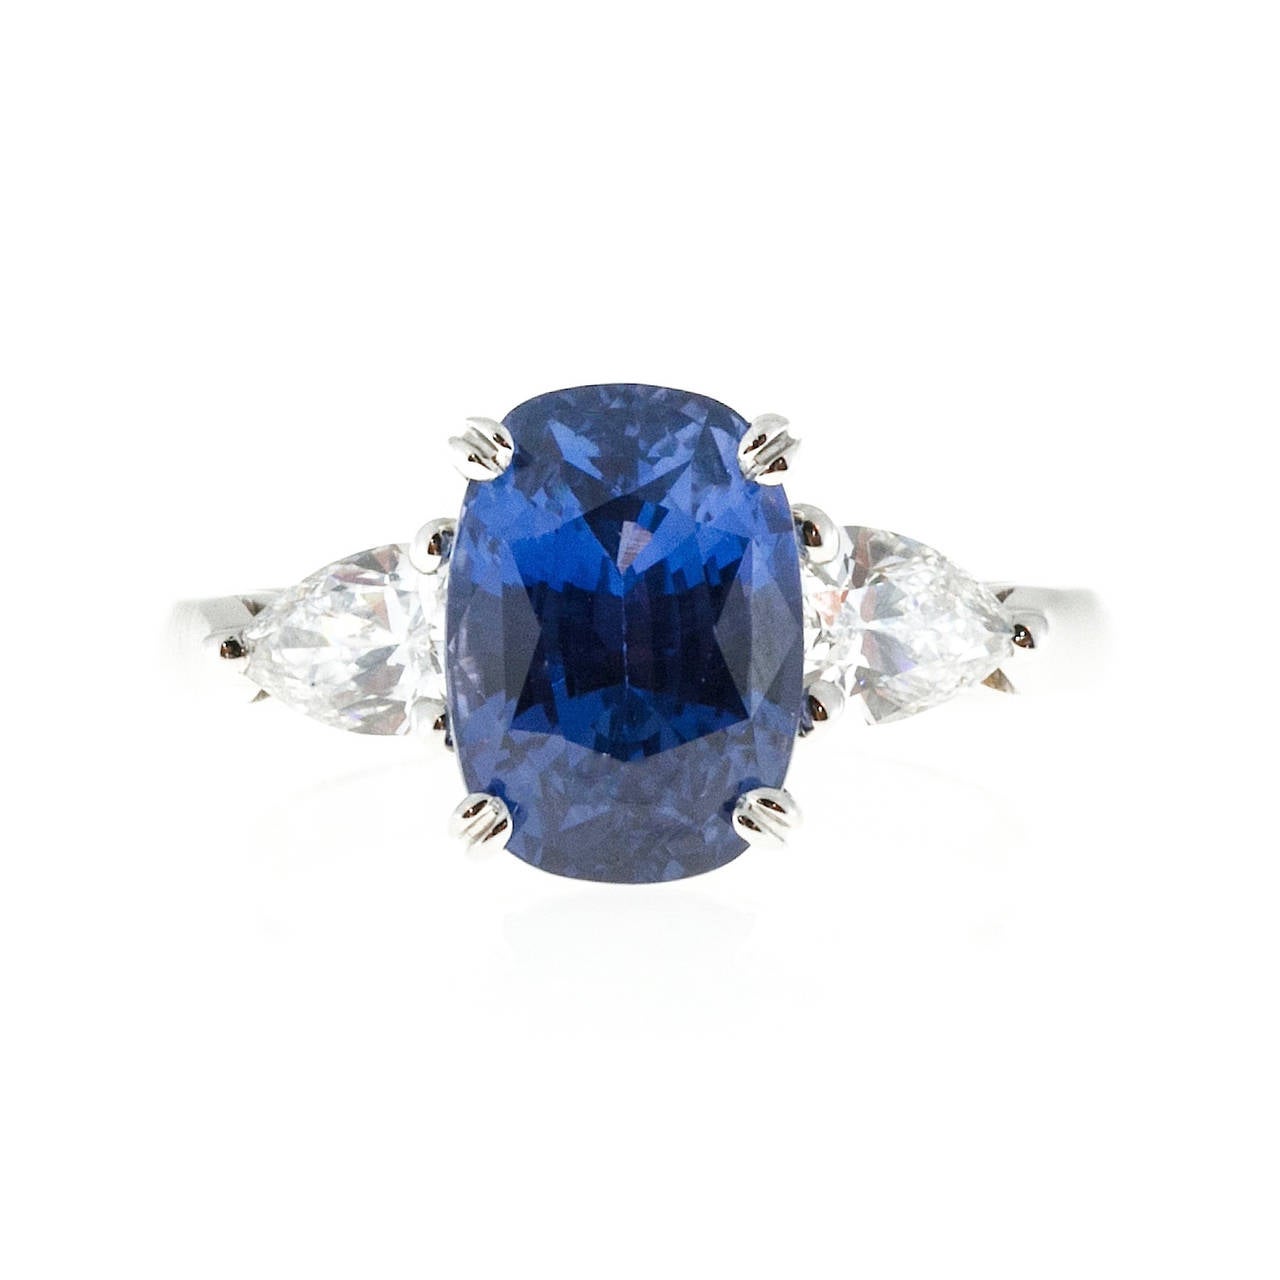 Vintage Natural Blue Violet Color Change 4.73ct Sapphire Diamond Ring Original elongated antique cushion cut natural no heat super rare certified color change Sapphire. Very bright mixed brilliant and step cut. Actually shows different colors in